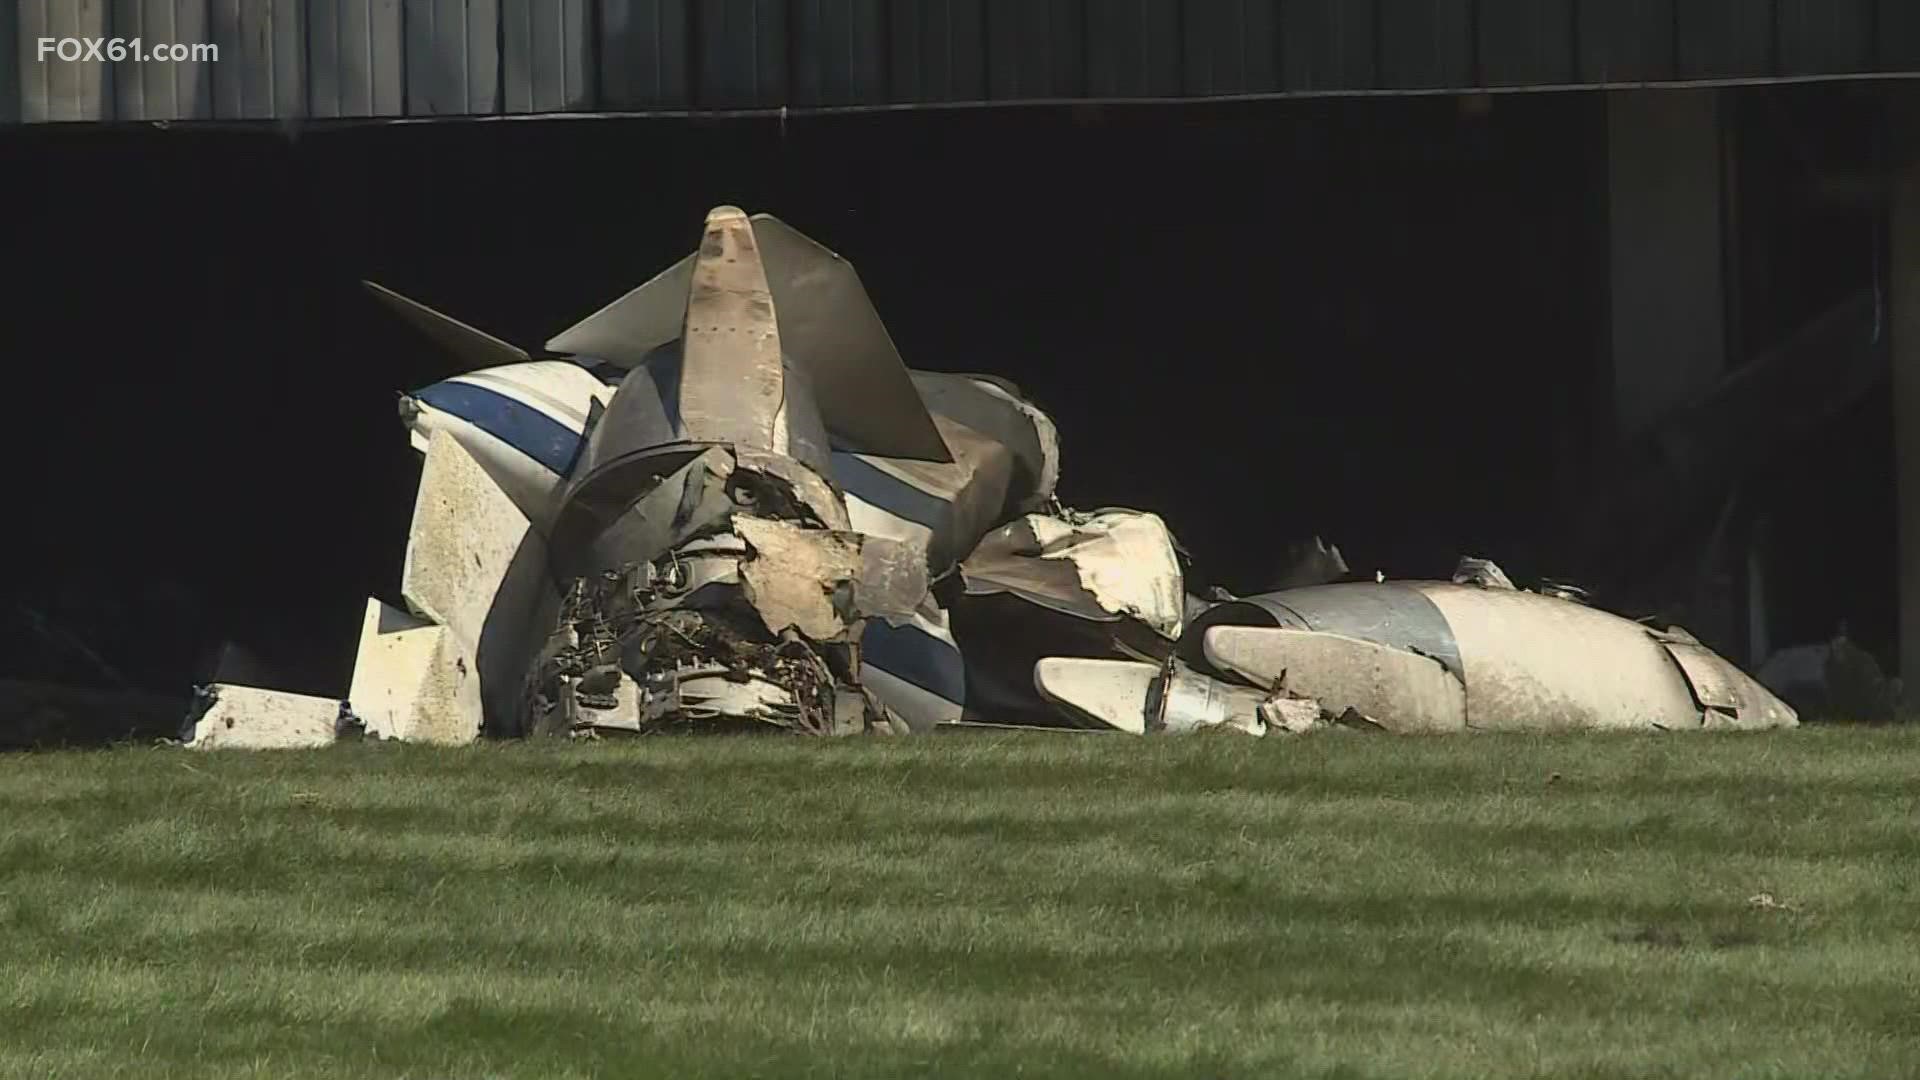 The plane took off from Plainville and crashed into the Trumpf, Inc. building, injuring two employees.